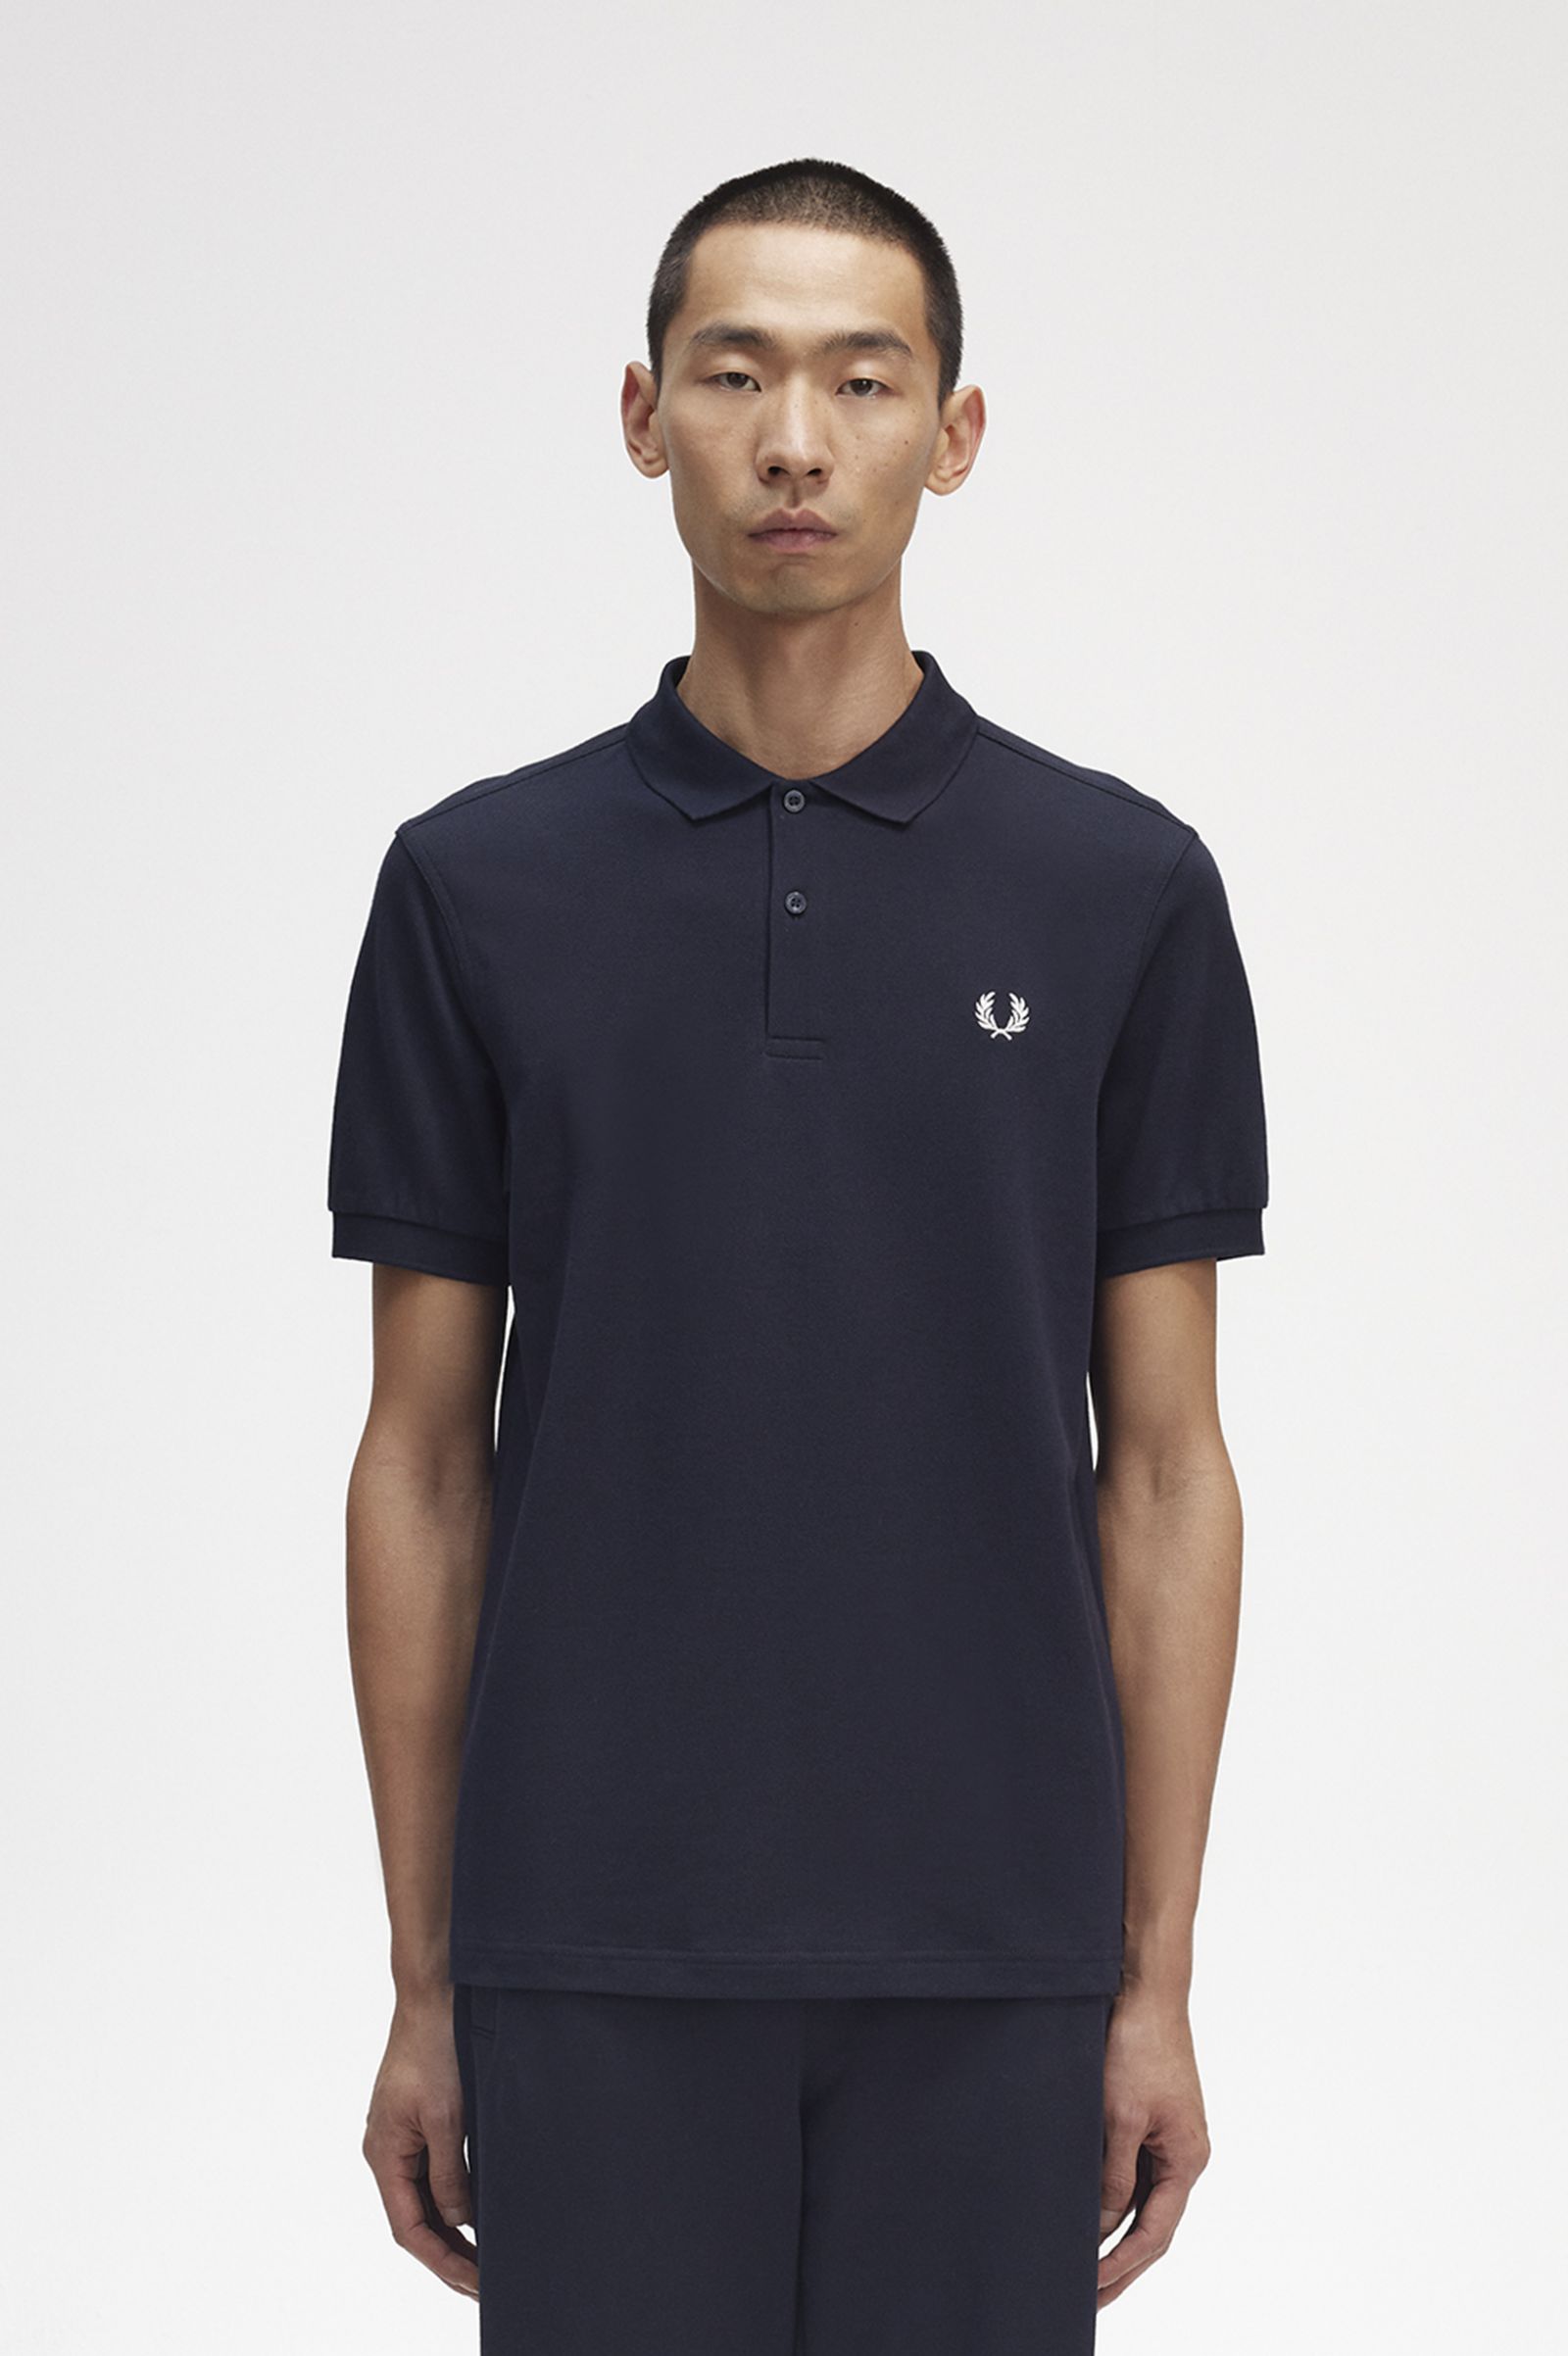 M6000 - Navy / White | The Fred Perry Shirt | Men's Short & Long